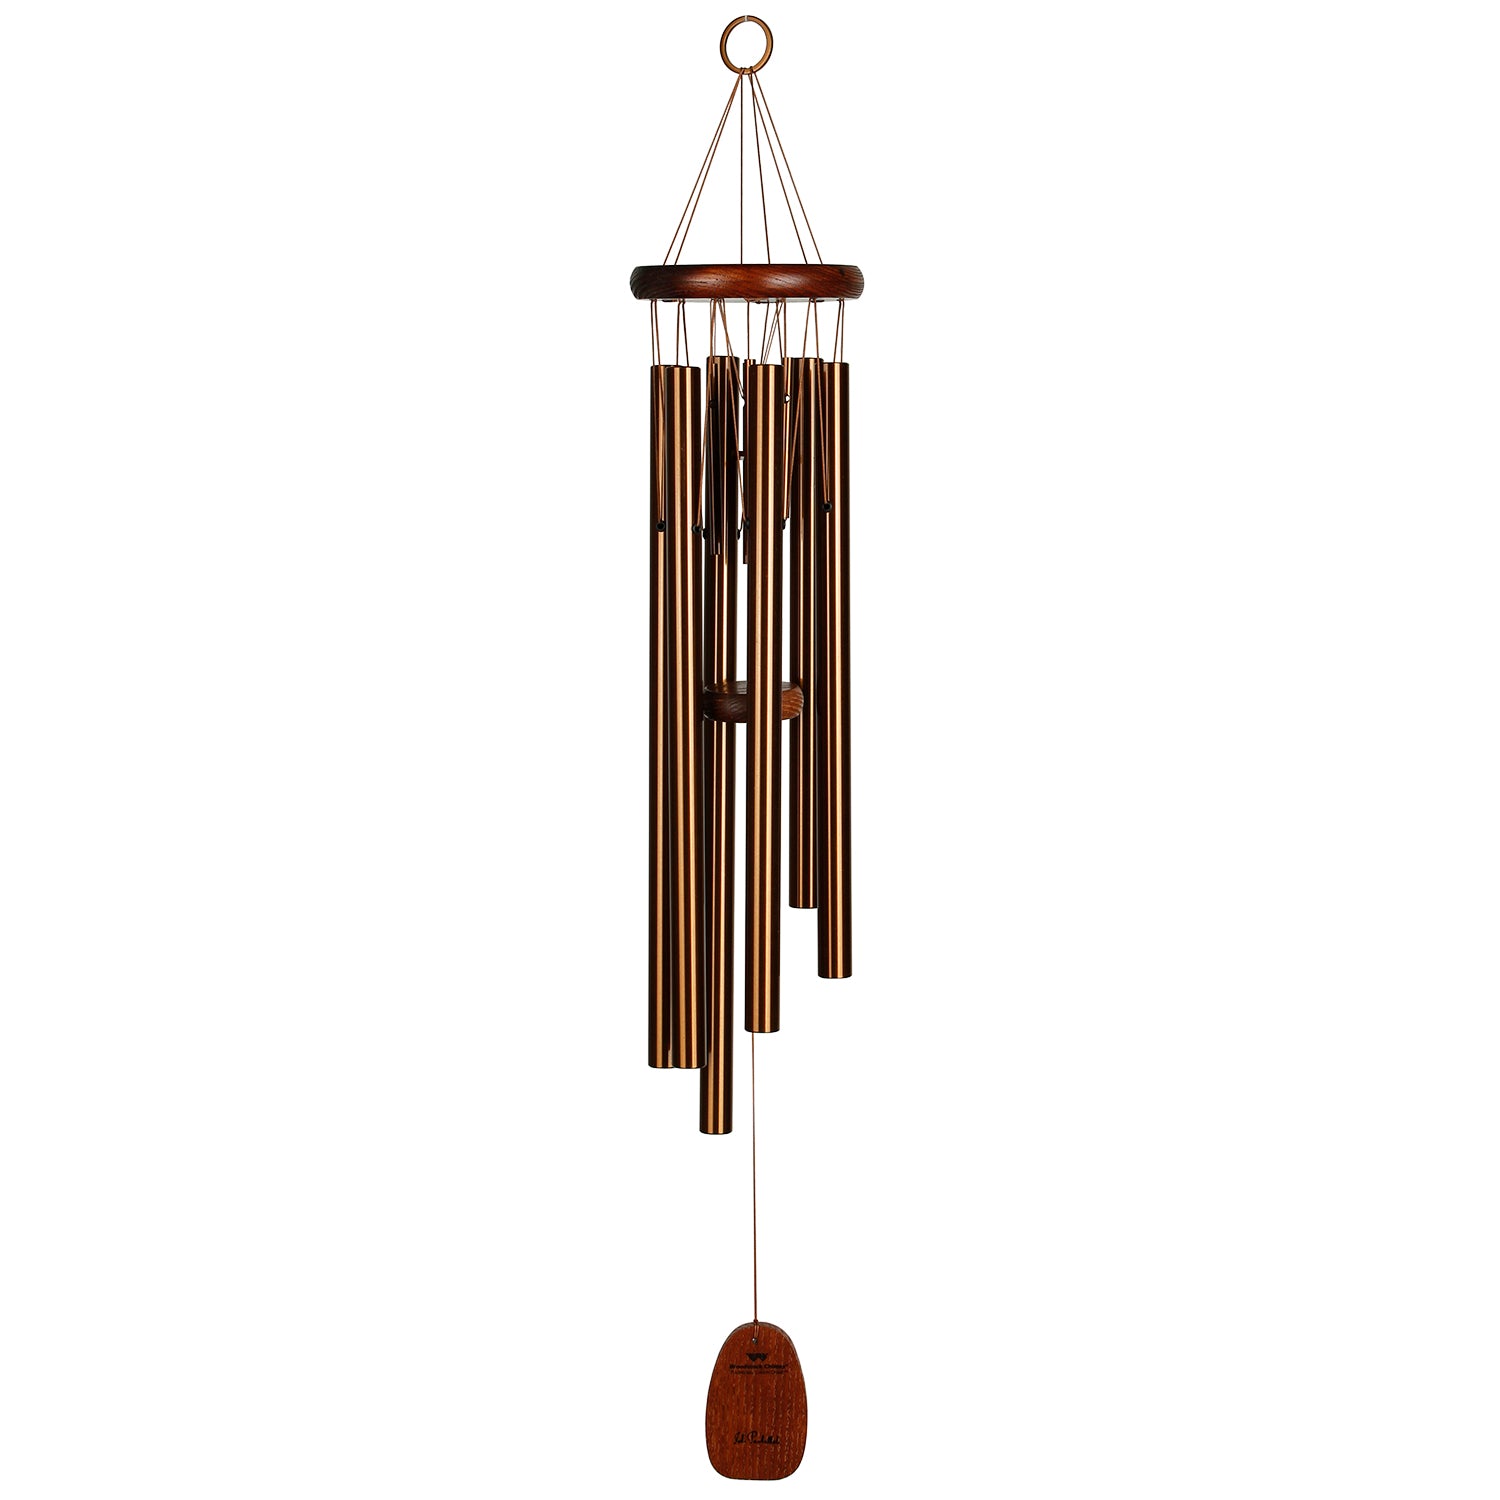 Pachelbel Canon Chime - Bronze full product image